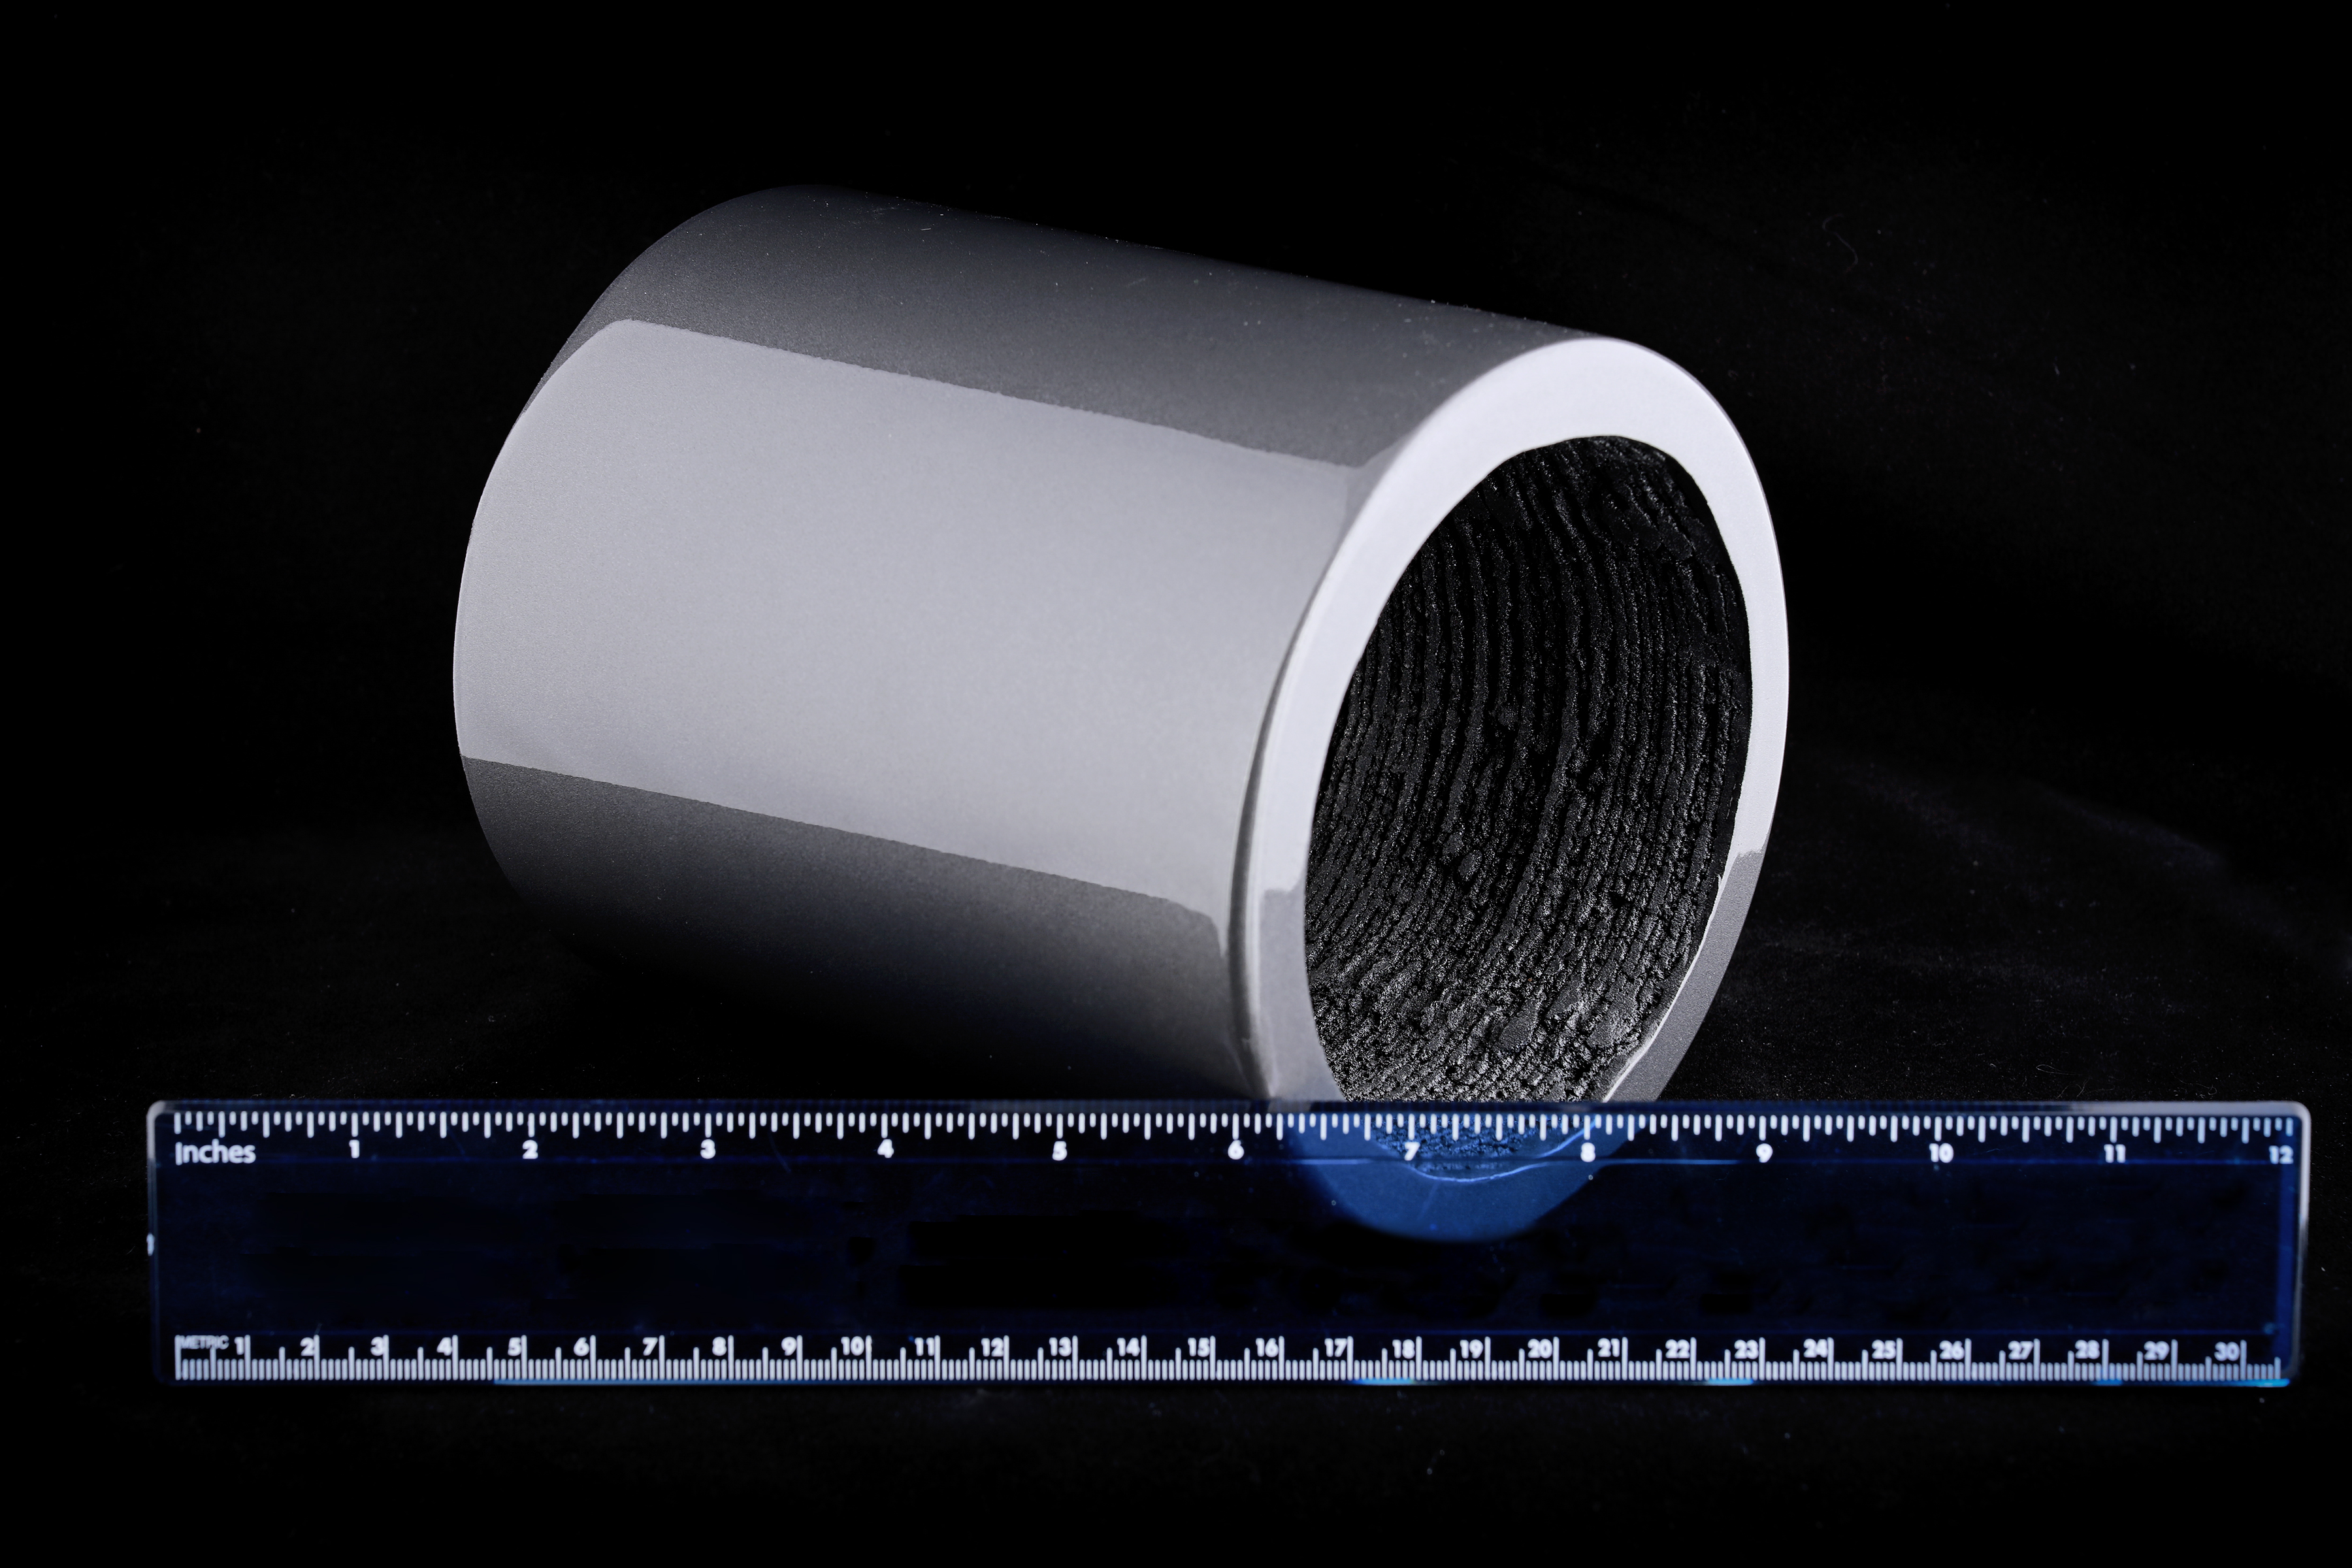 This isotropic, neodymium-iron-boron bonded permanent magnet was 3D-printed at DOE's Manufacturing Demonstration Facility at Oak Ridge National Laboratory. Photo: Oak Ridge National Laboratory.